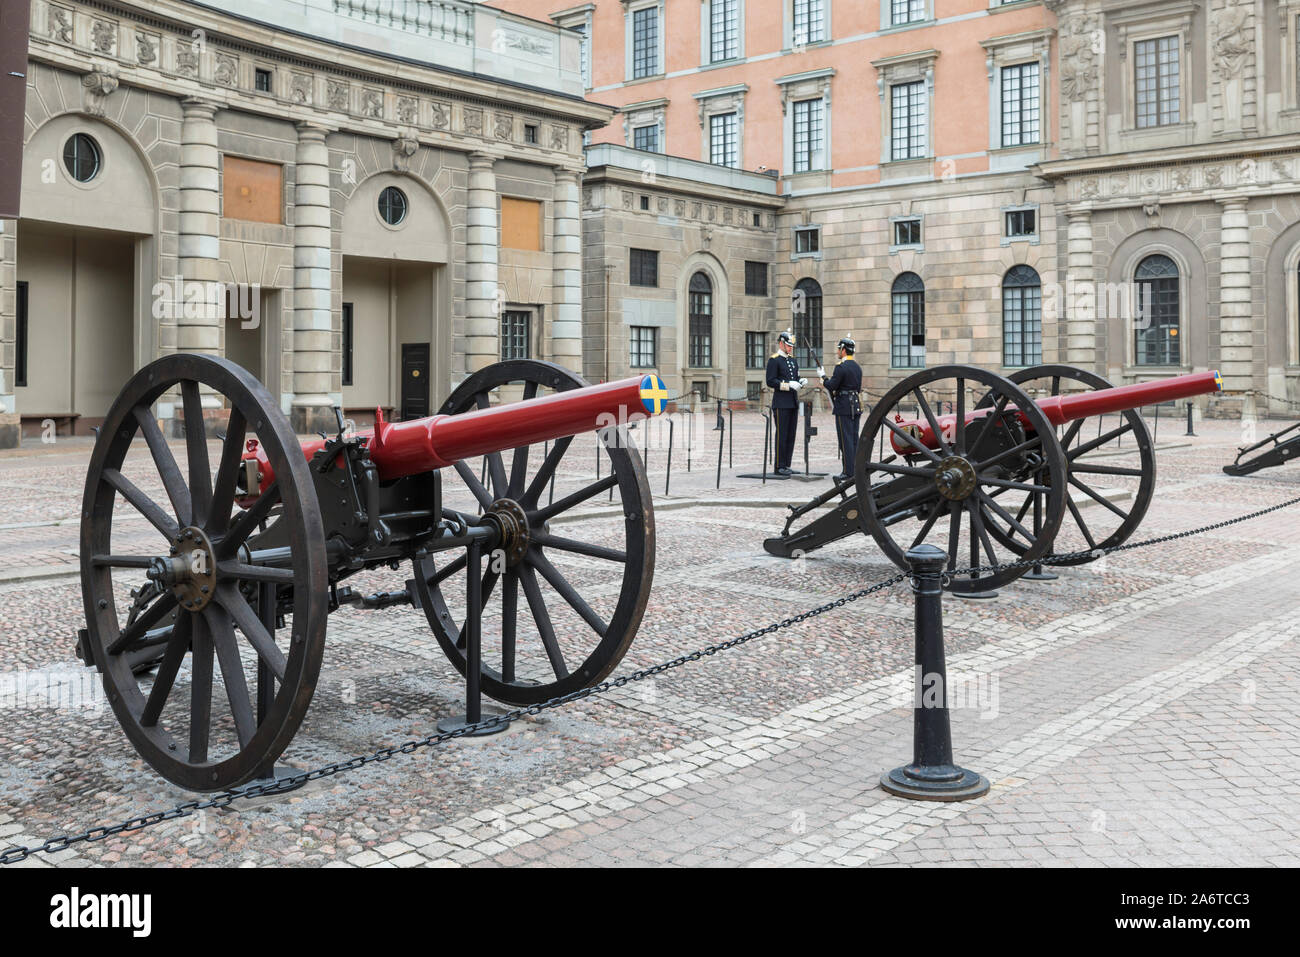 Stockholm Royal Palace, view of ceremonial cannon lined up in the courtyard of the Swedish Royal Palace (Kungliga Slottet), Gamla Stan, Stockholm. Stock Photo